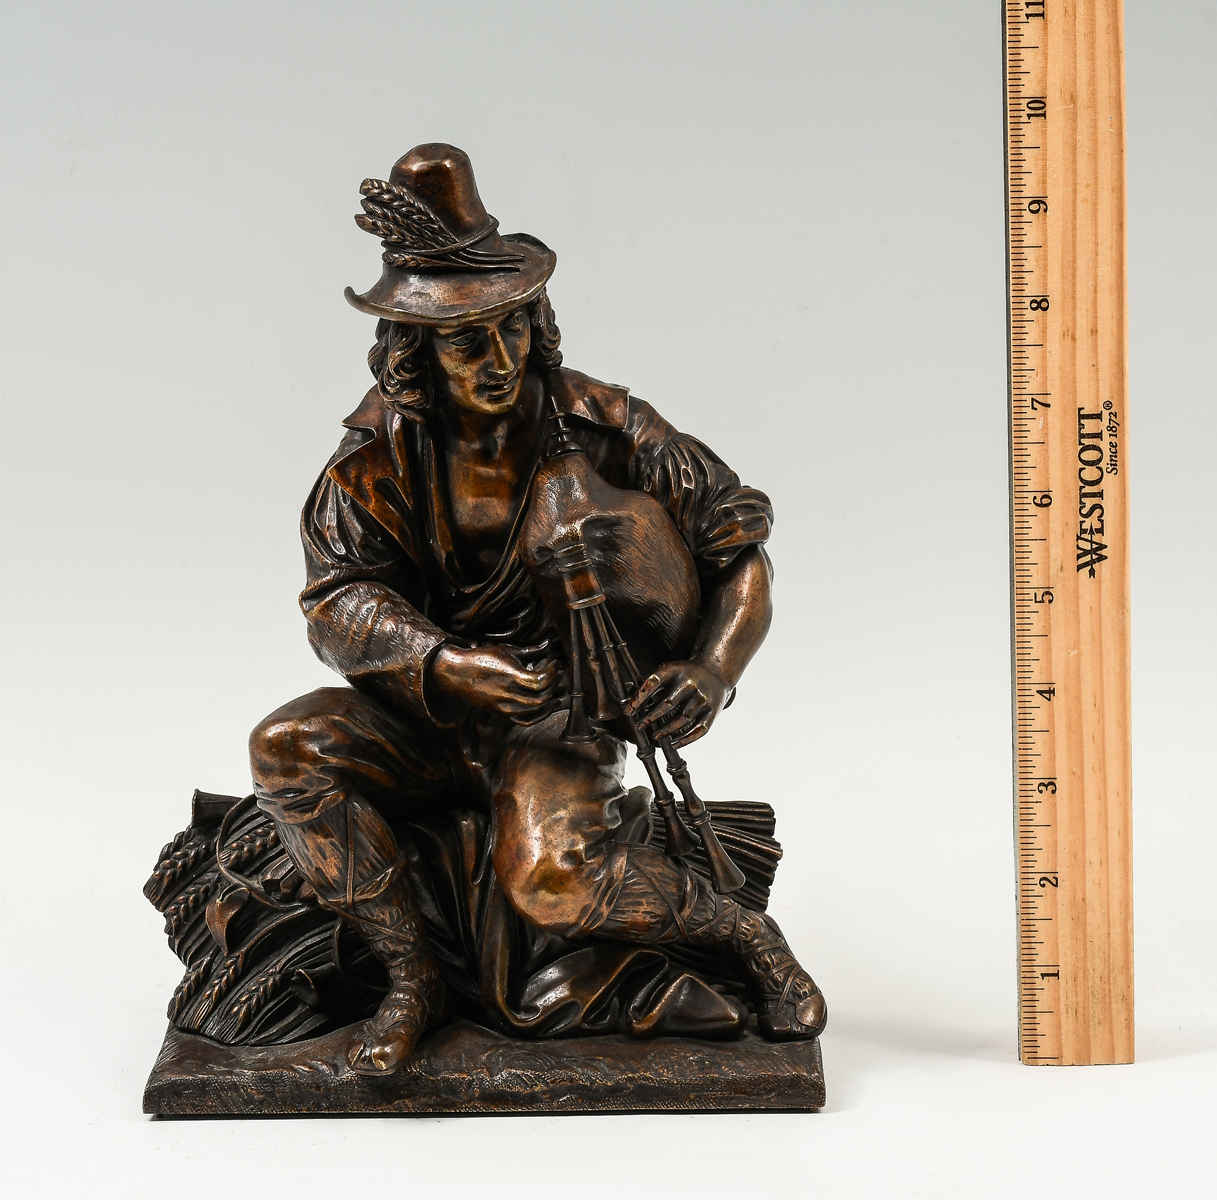 BRONZE BAGPIPE PLAYER BY FEUCHERE: